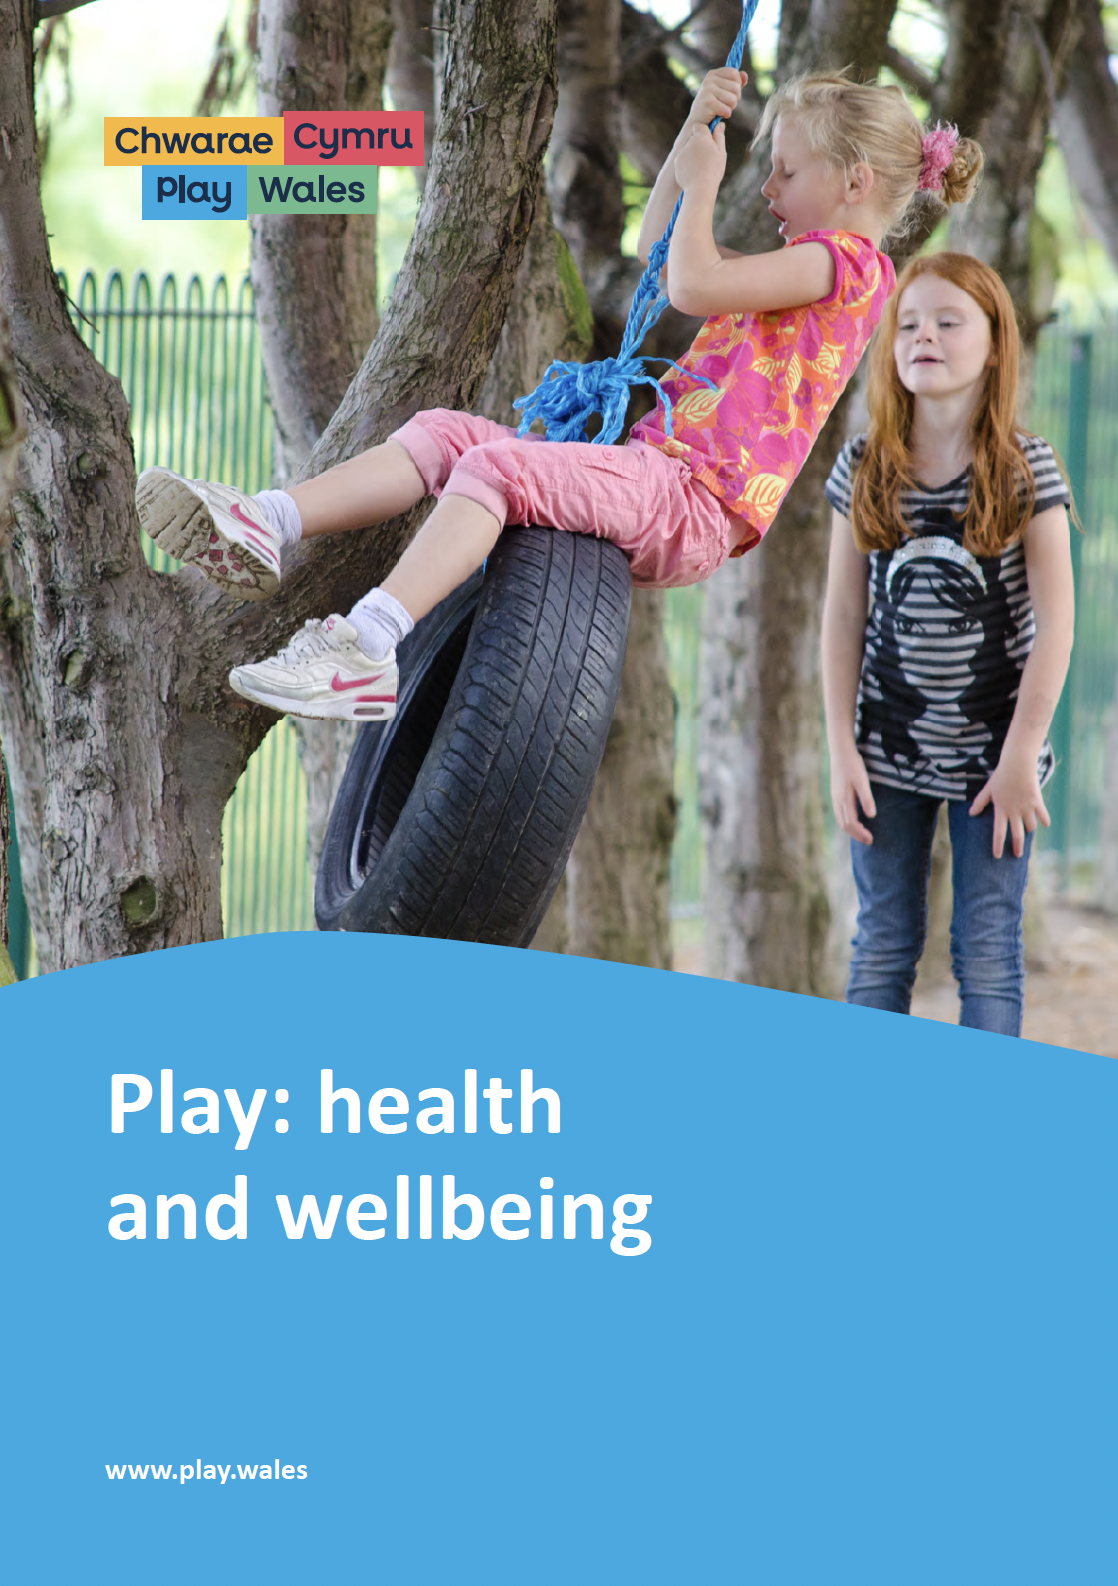 Play: health and wellbeing